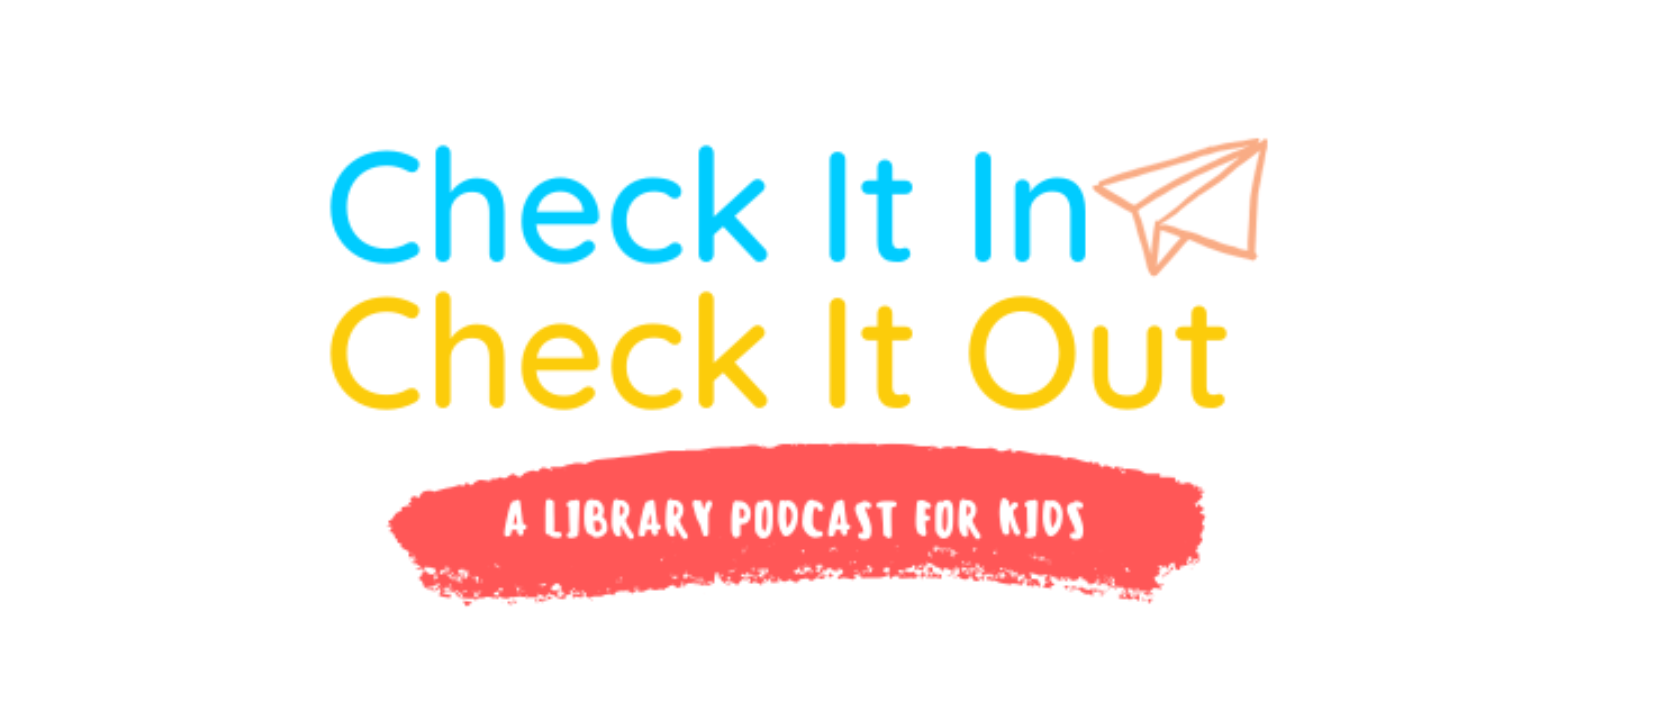 Check It In Check It Out, a library podcast for kids graphic